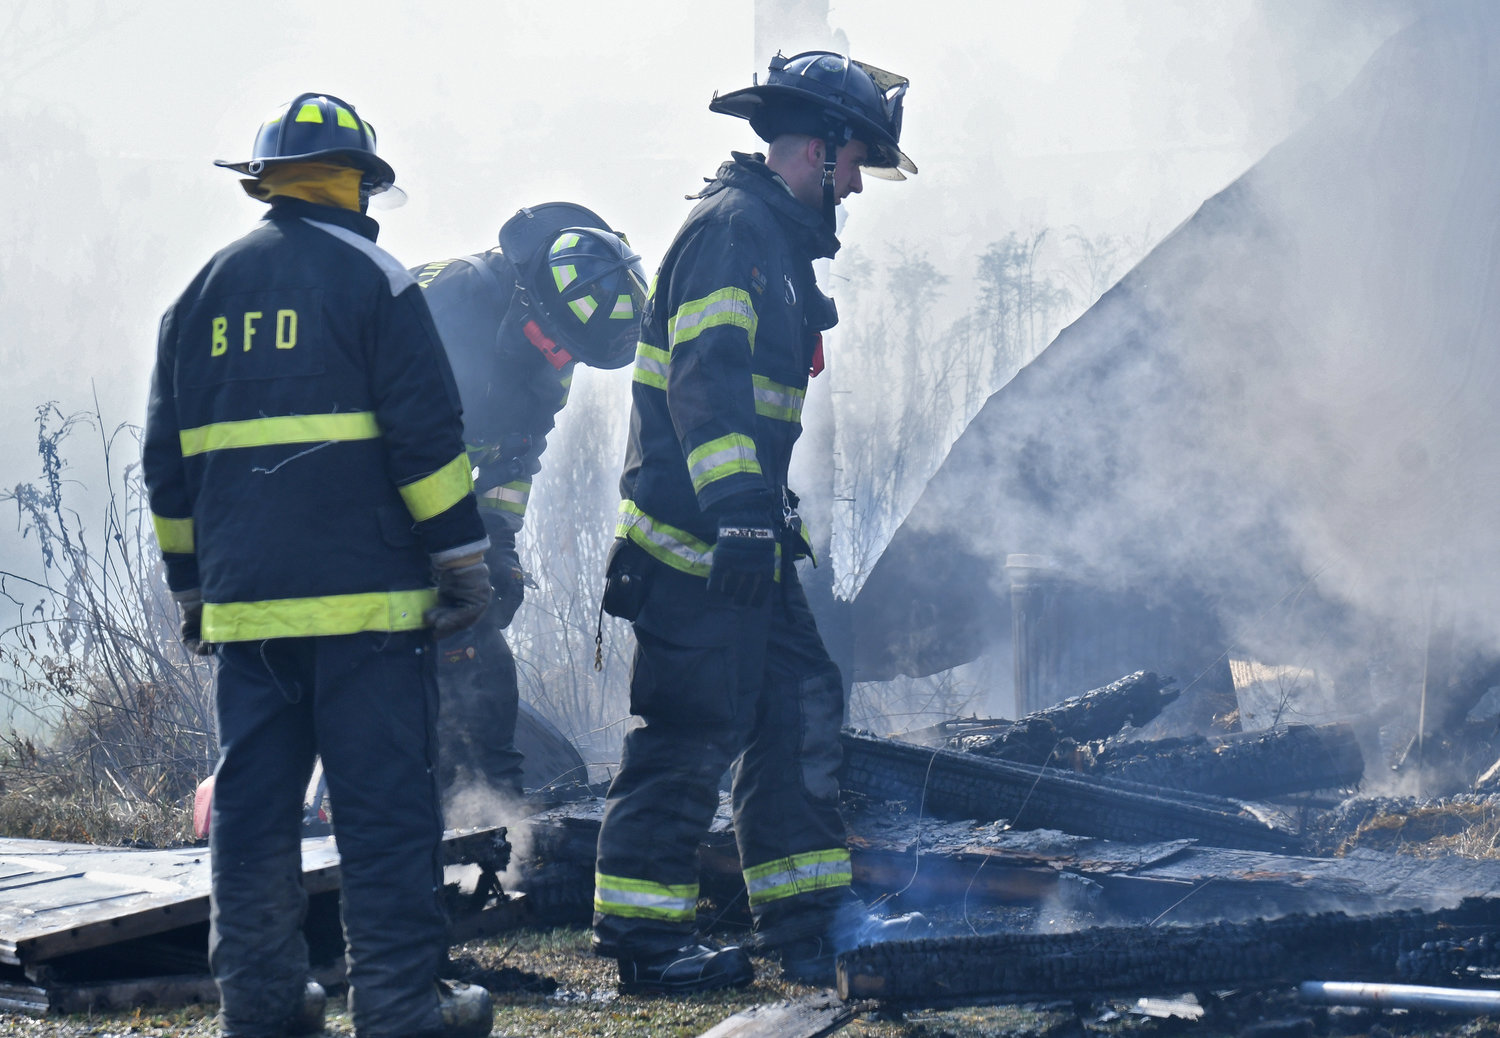 Members of Boonville Fire Department pick through the charred remains of collapsed framework of a barn destroyed by flames on Jackson Hill Road in Ava Monday morning. The alarm rang for 7754 Jackson Hill Road shortly before 8:30 a.m.